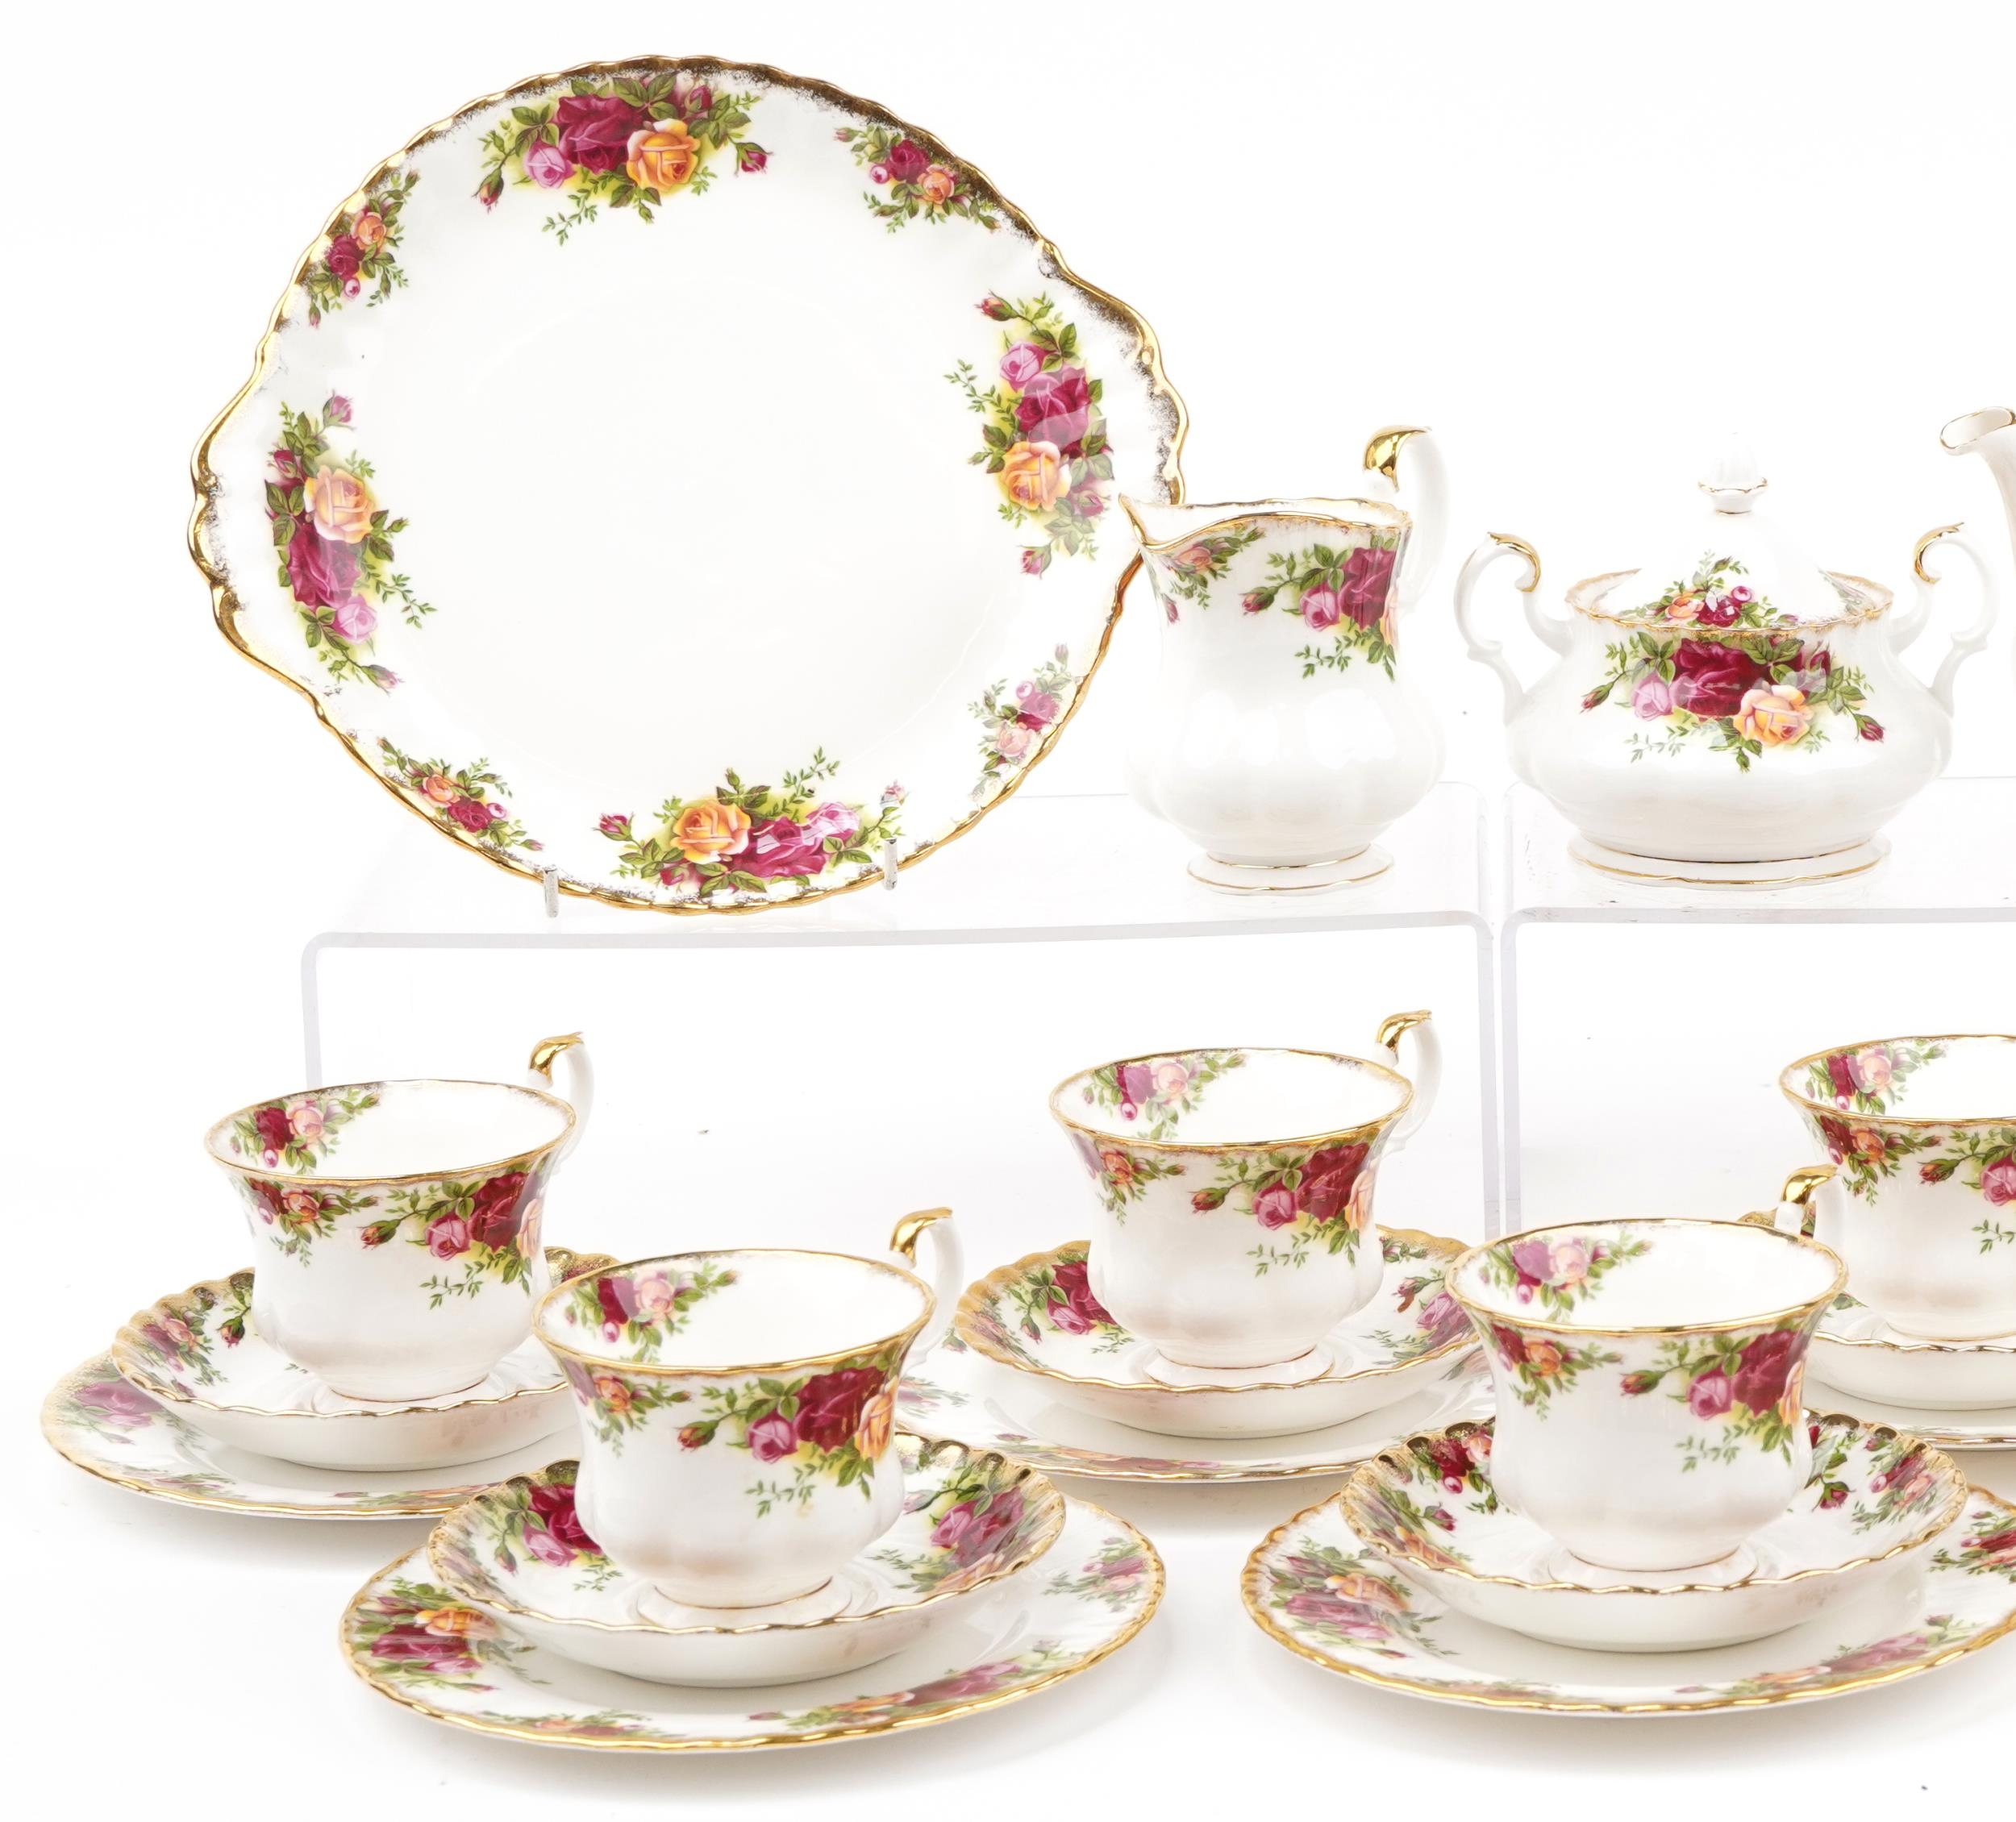 Royal Albert Old Country Roses six place tea service with teapot, lidded sugar bowl and milk jug, - Image 4 of 8